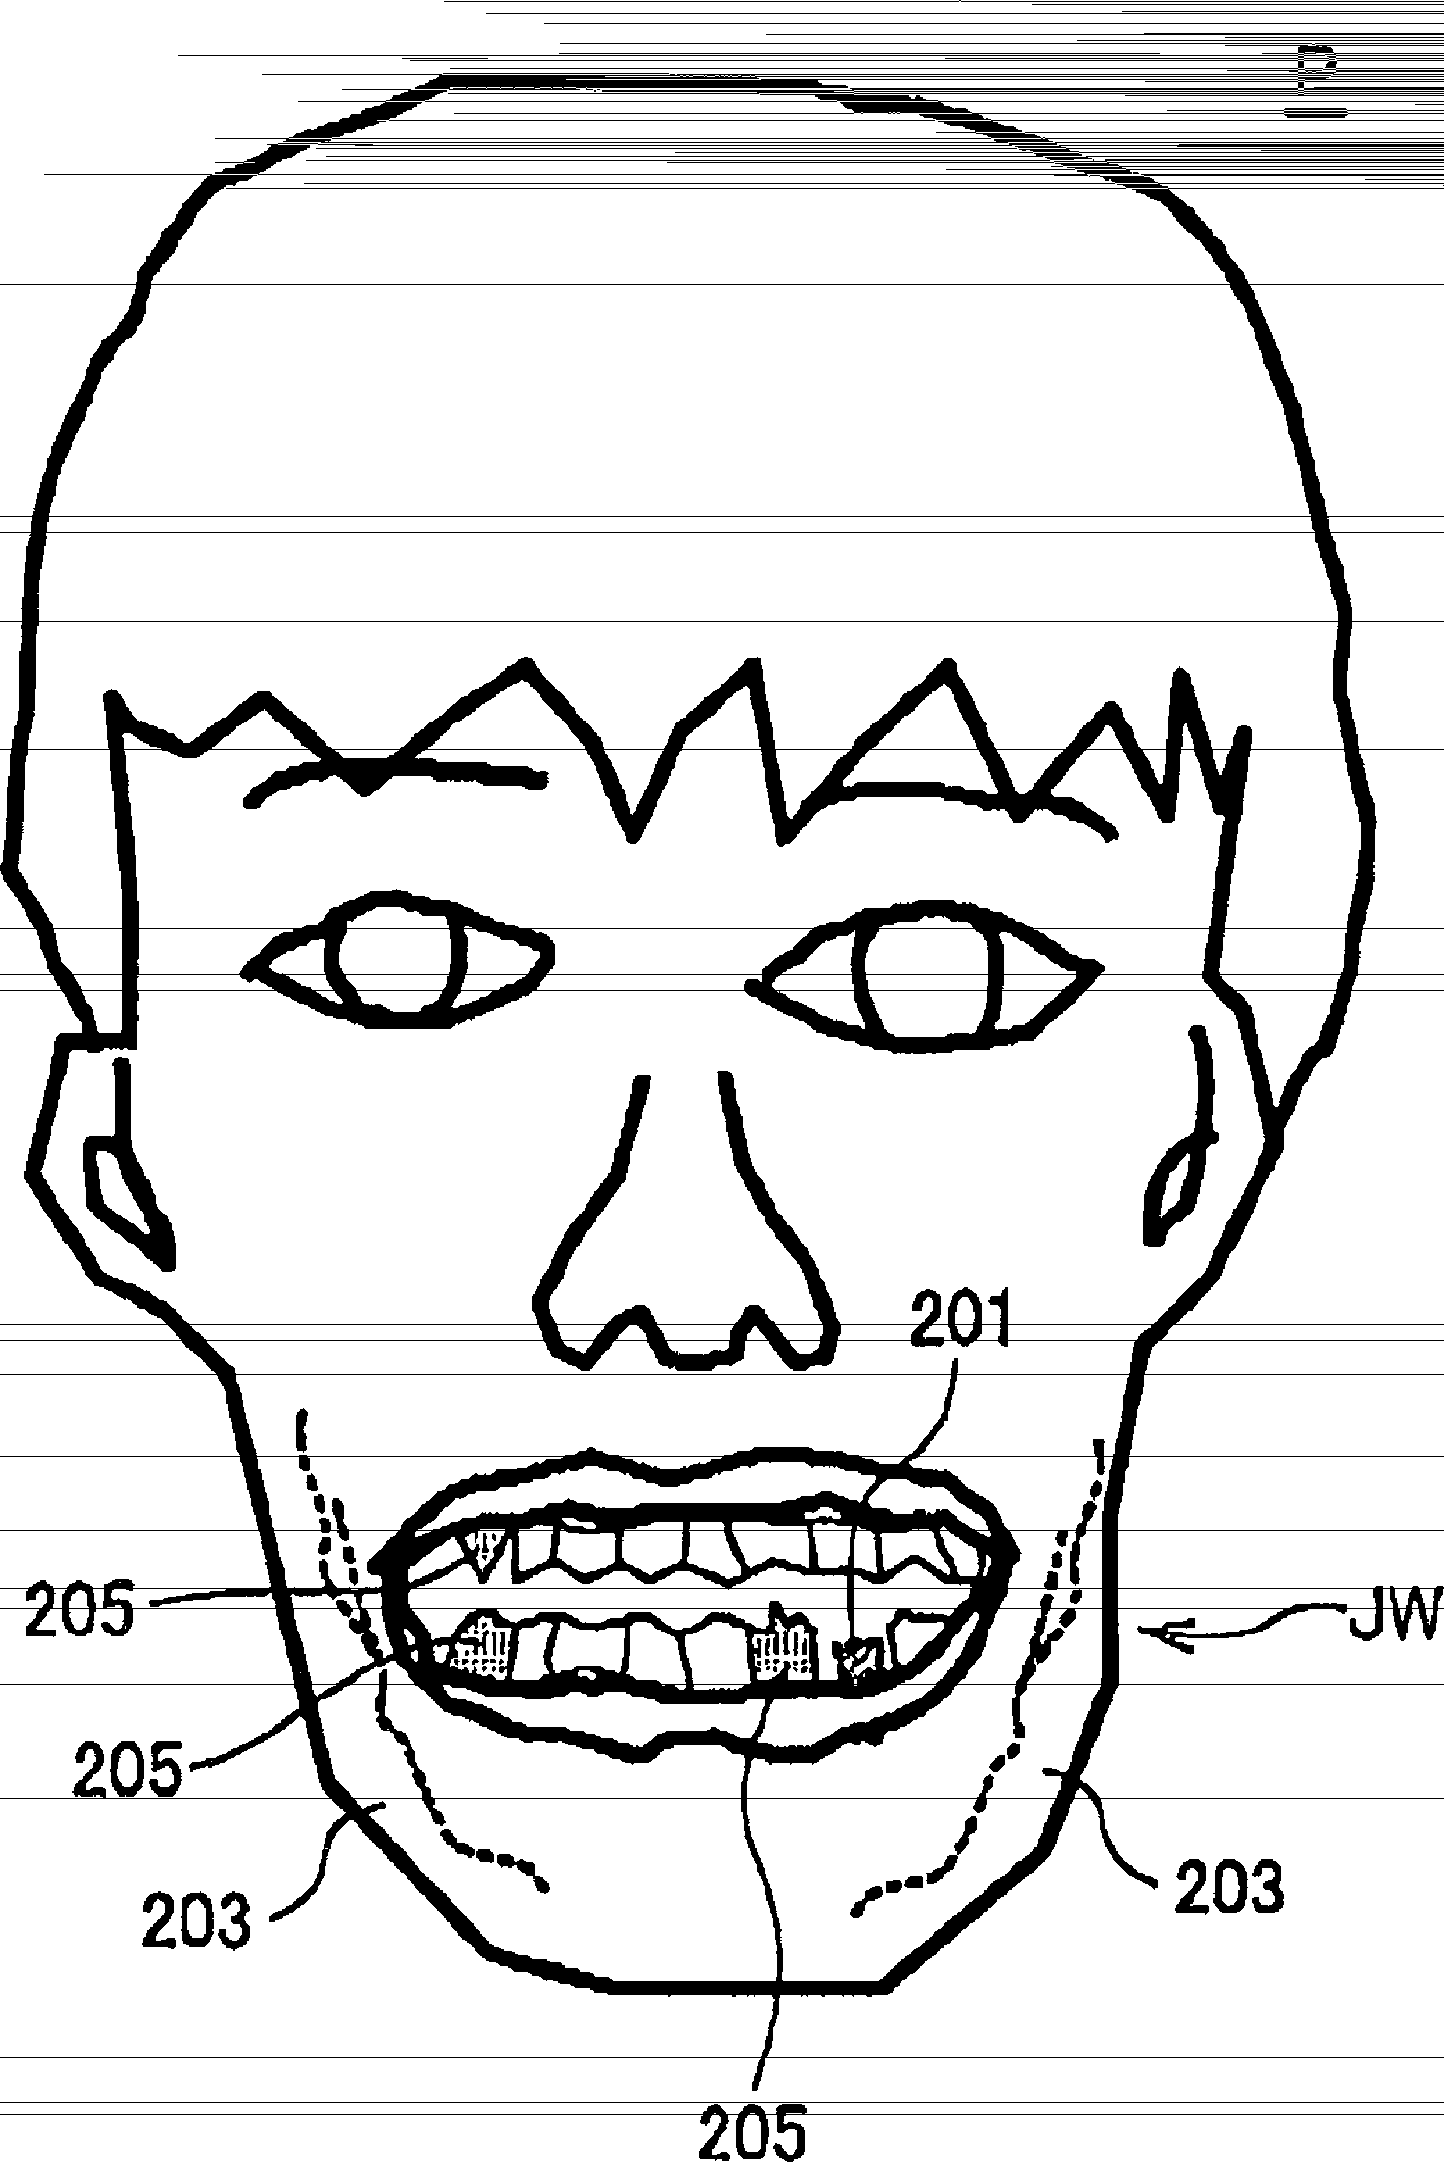 Method and apparatus for supporting dental implantation surgery